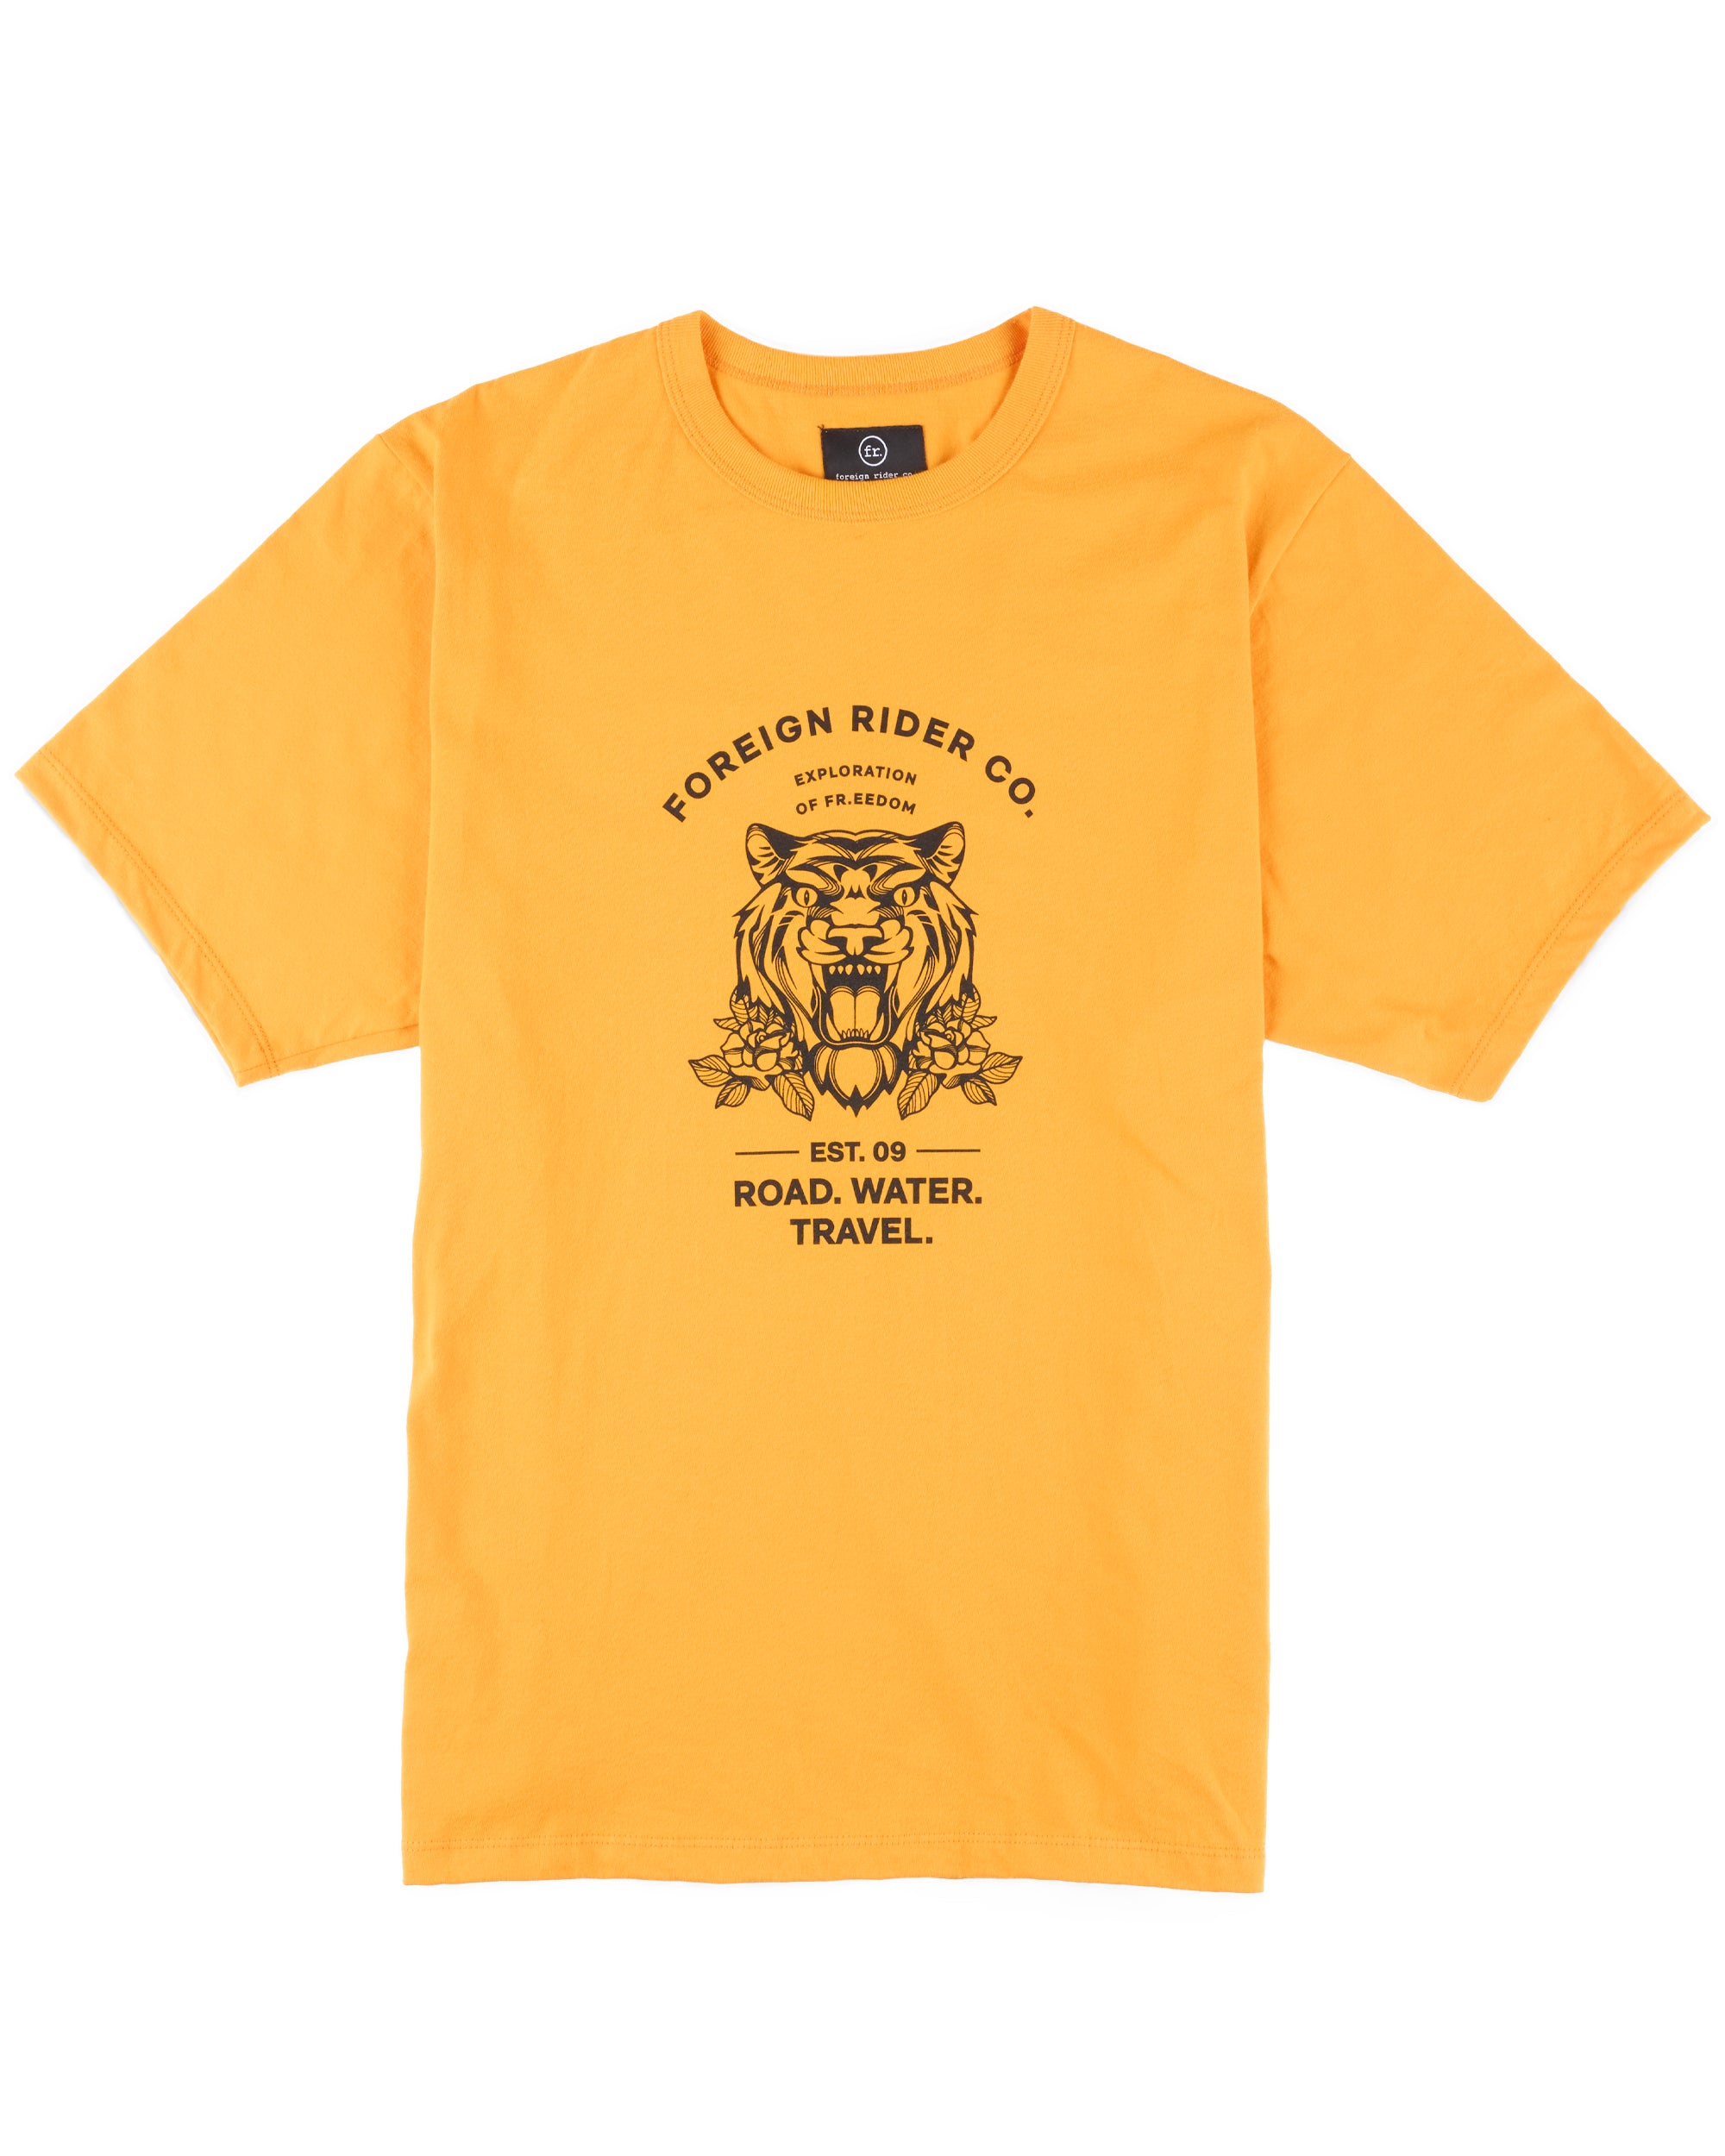 FR. Tiger Graphic T-Shirt Yellow - Foreign Rider Co.